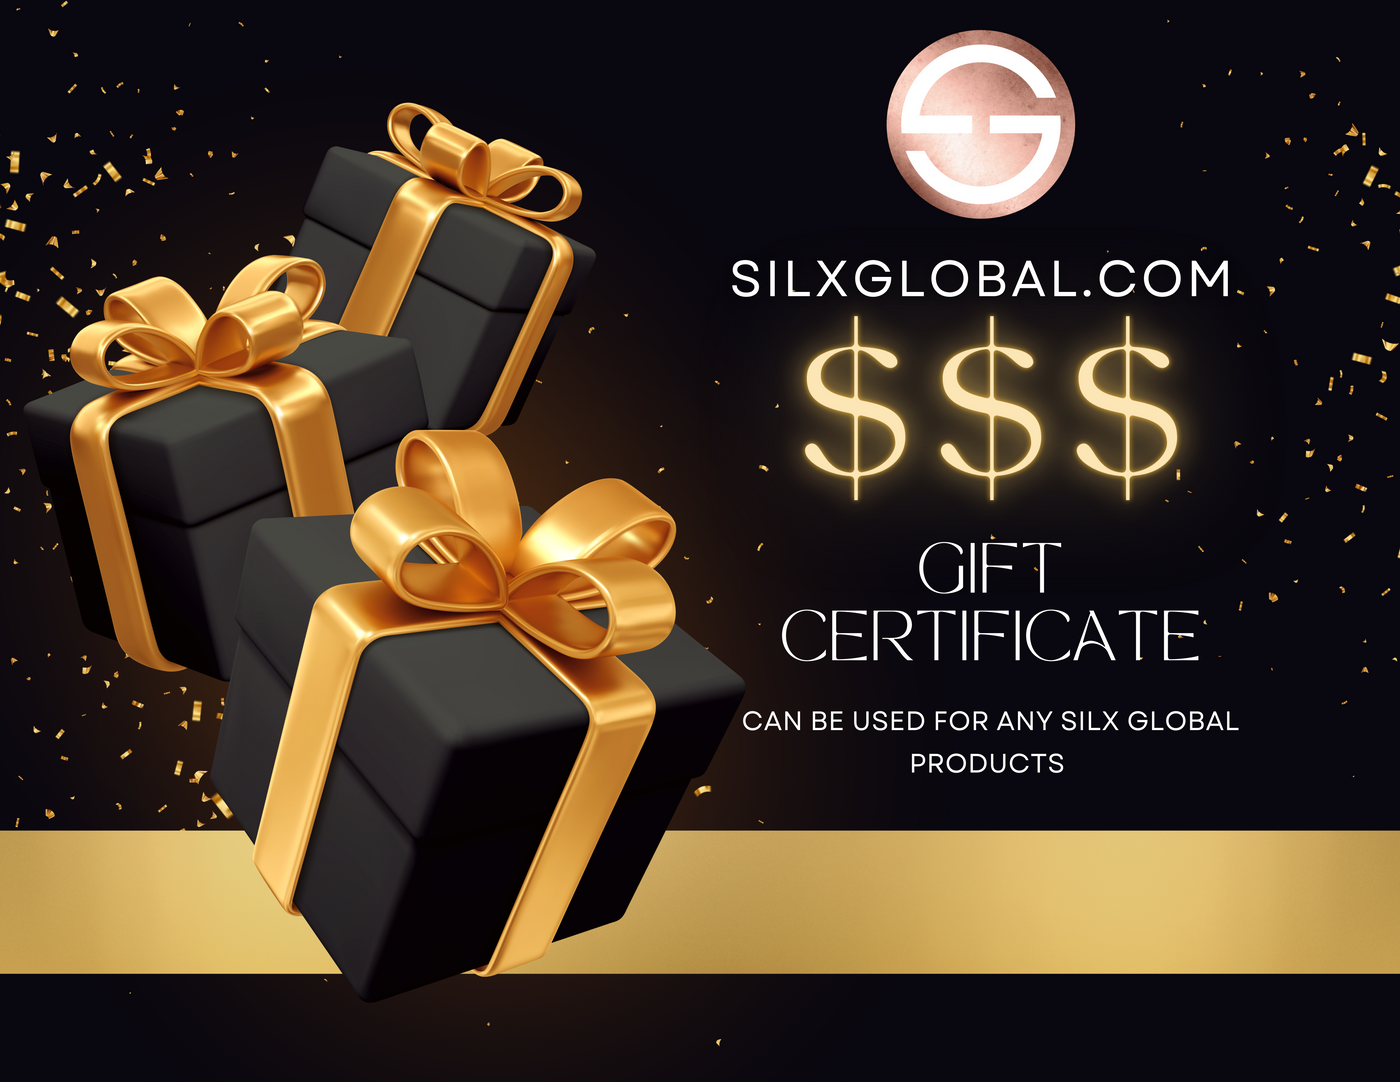 SILX Global "BUY ANYTHING" gift cards!